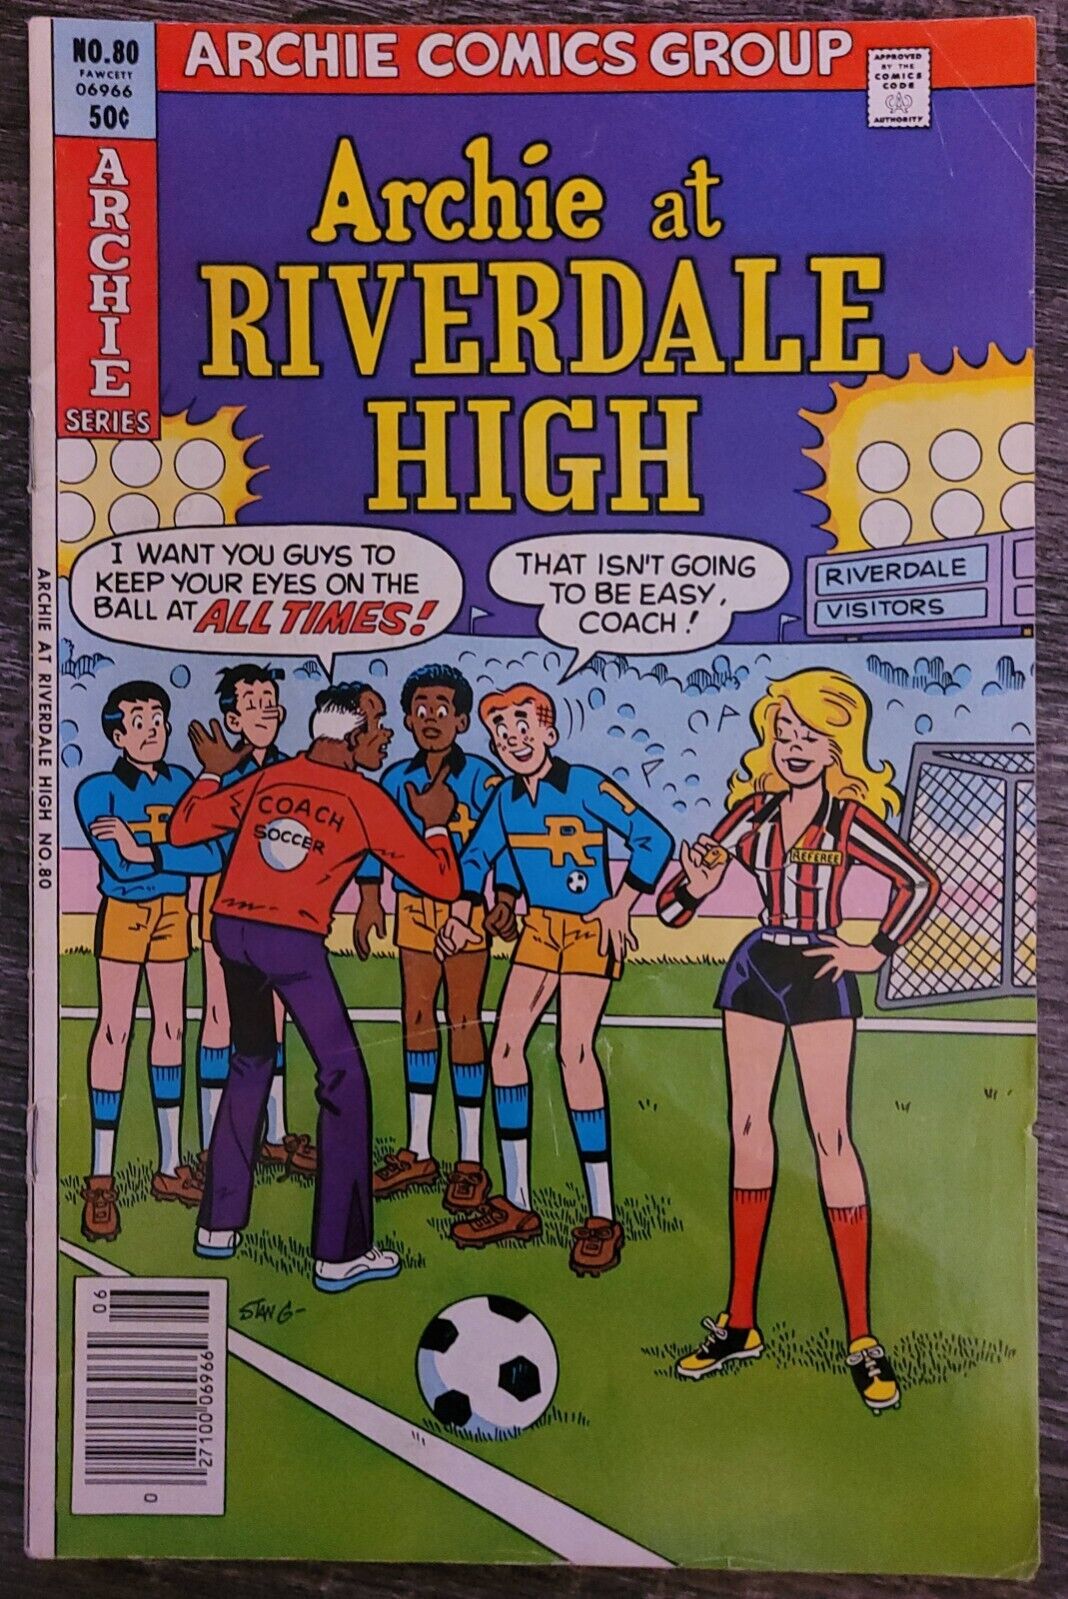 Archie At Riverdale High No. 80 - Newsstand Variant - Archie Comics